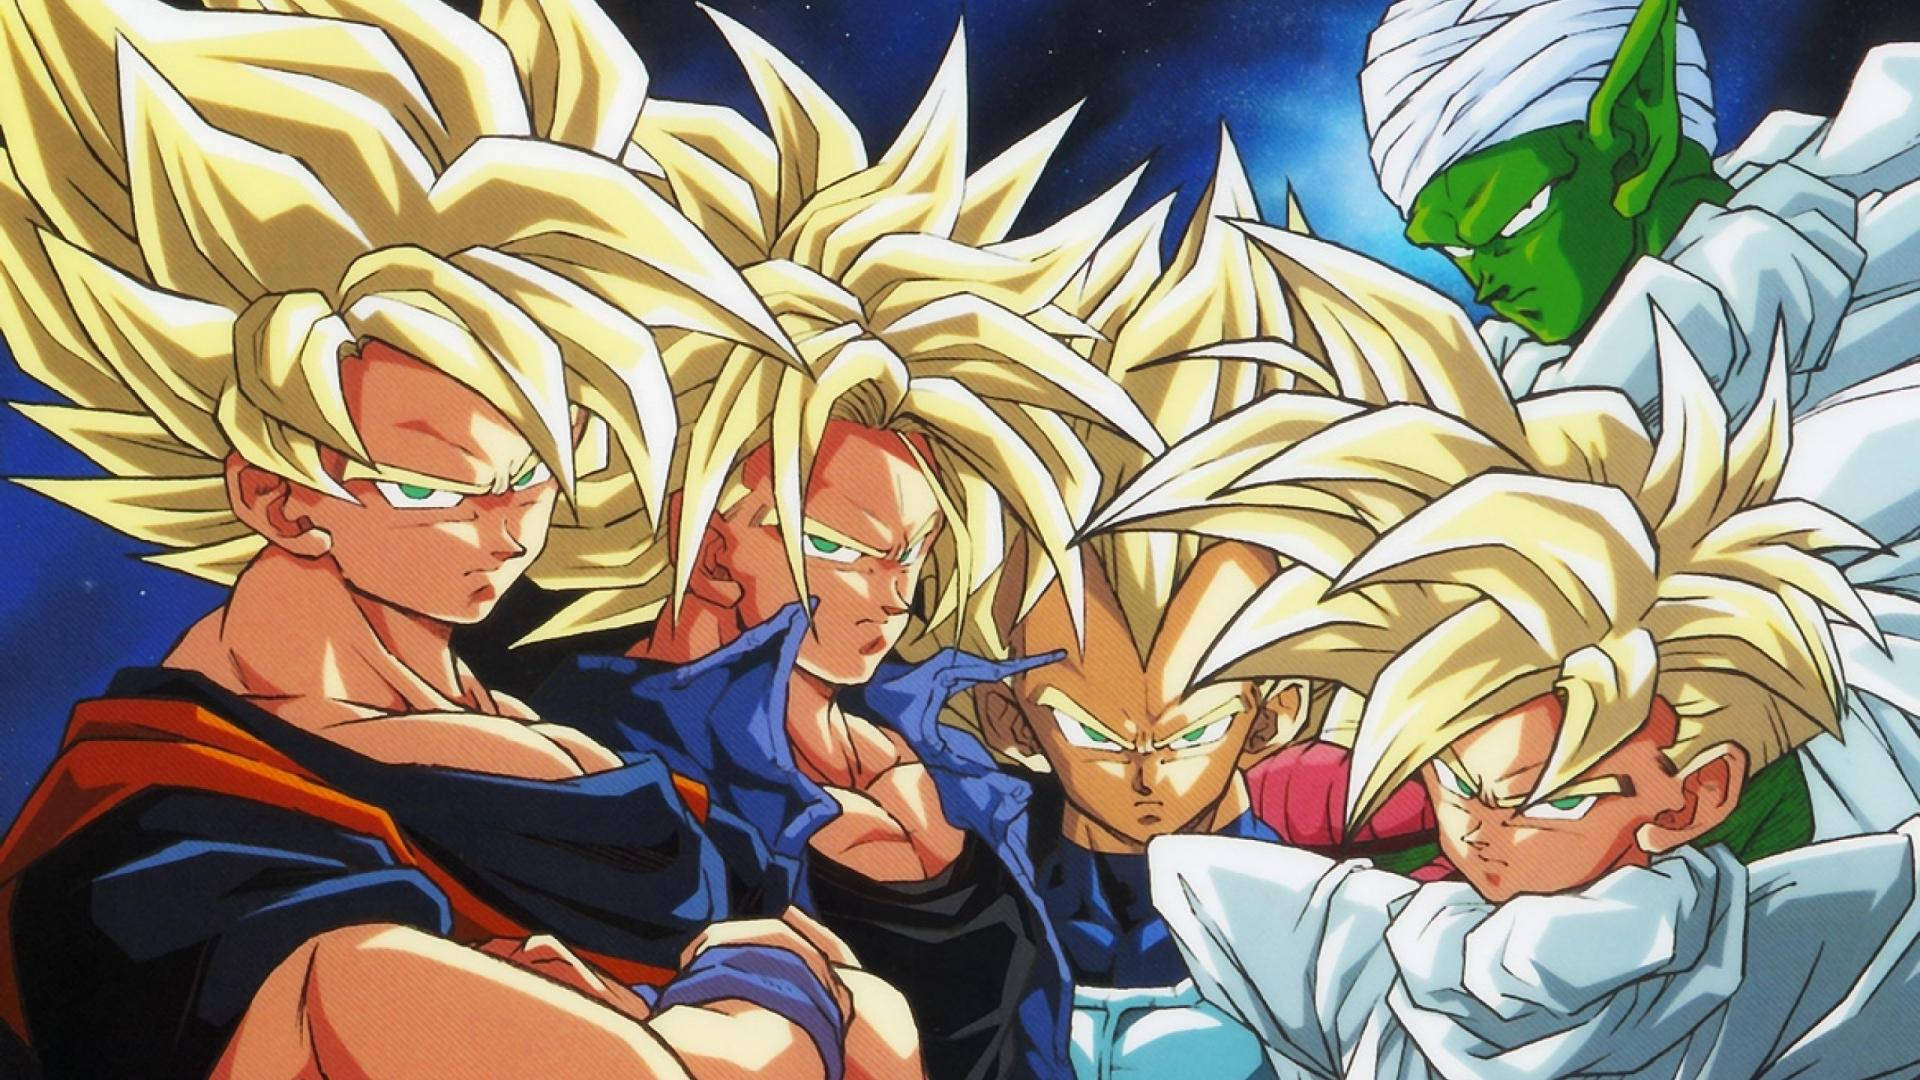 1920X1080 Dragon Ball Z Wallpaper and Background